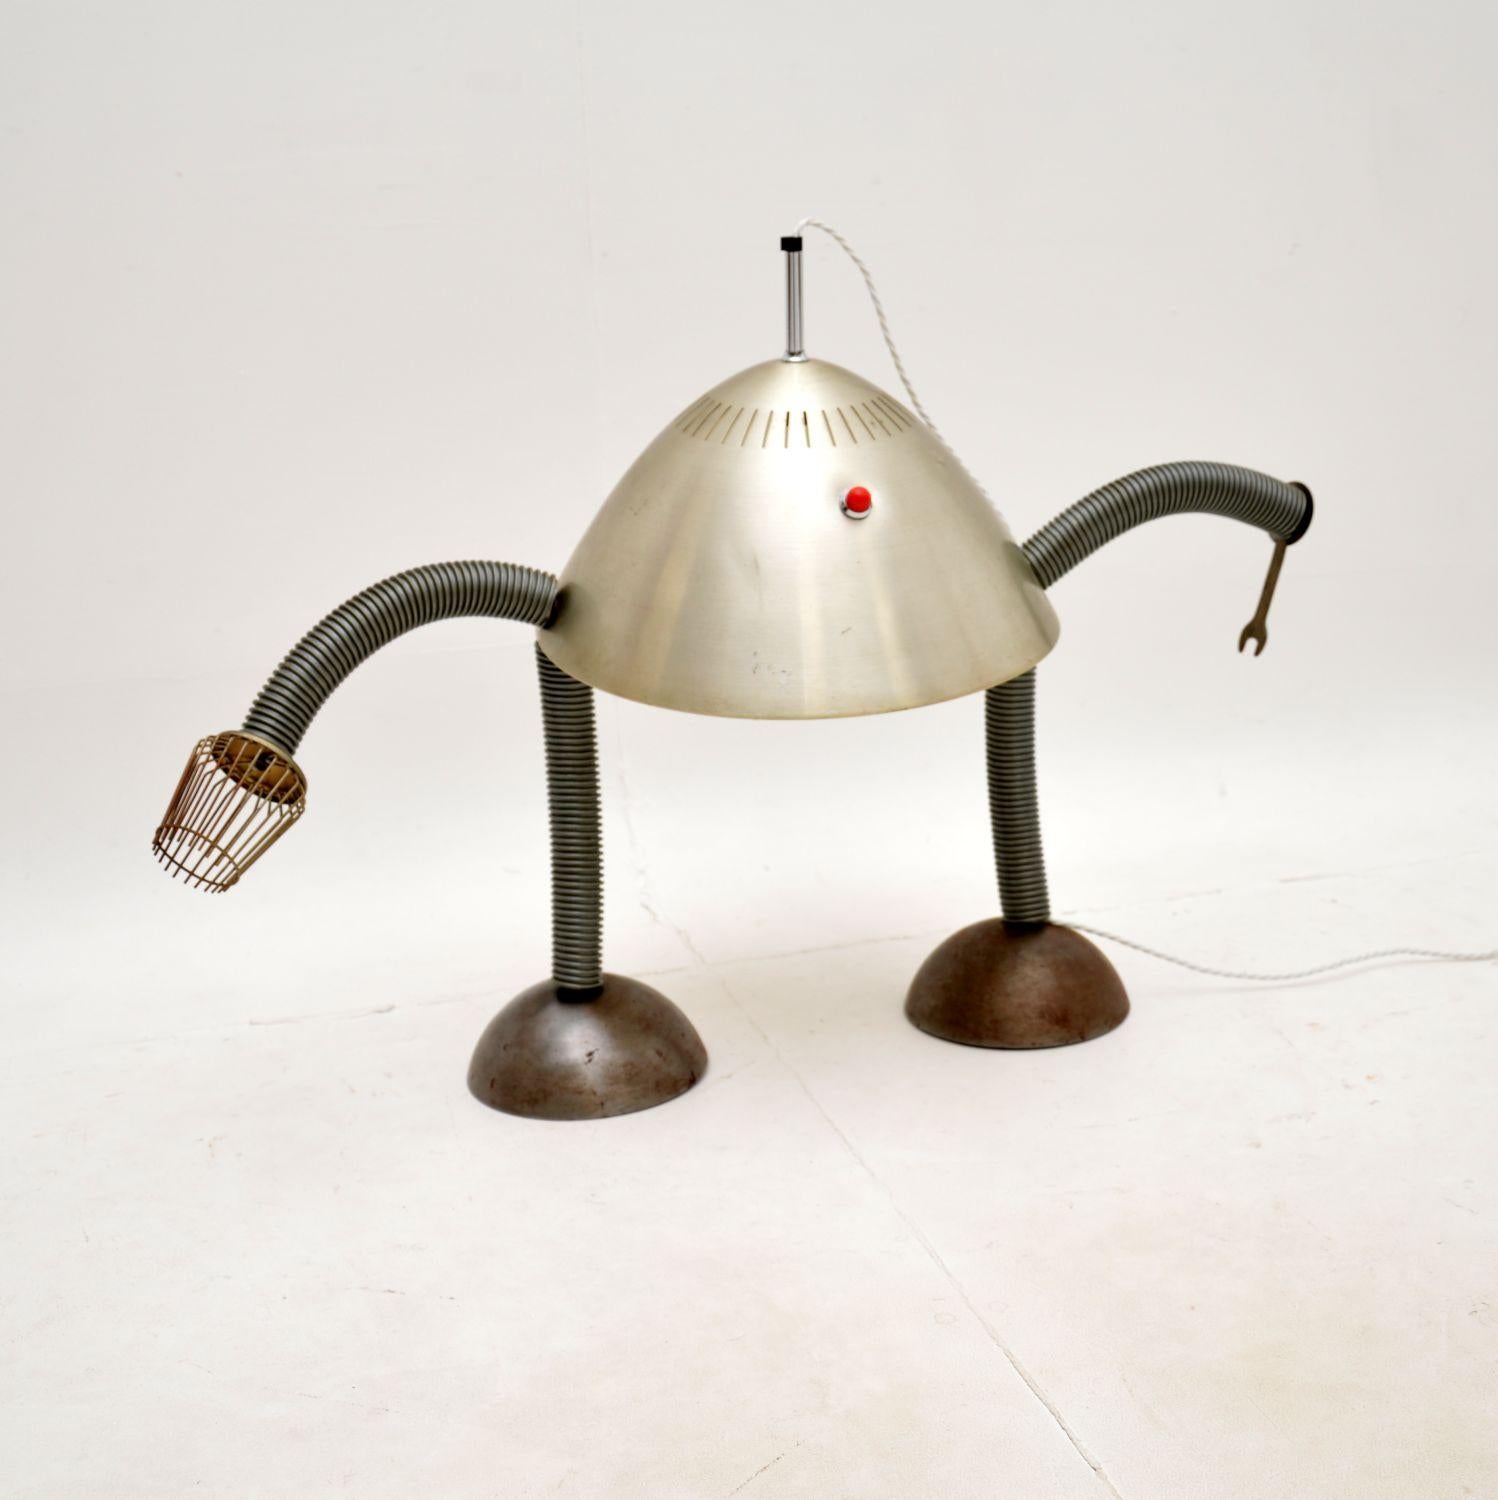 A unique and very unusual vintage robot table lamp. This was hand made by a crafty individual in around the 1960-70’s.

Someone has made this at home from parts of household objects, including a Pifco radiator cap for the hand. It is quite